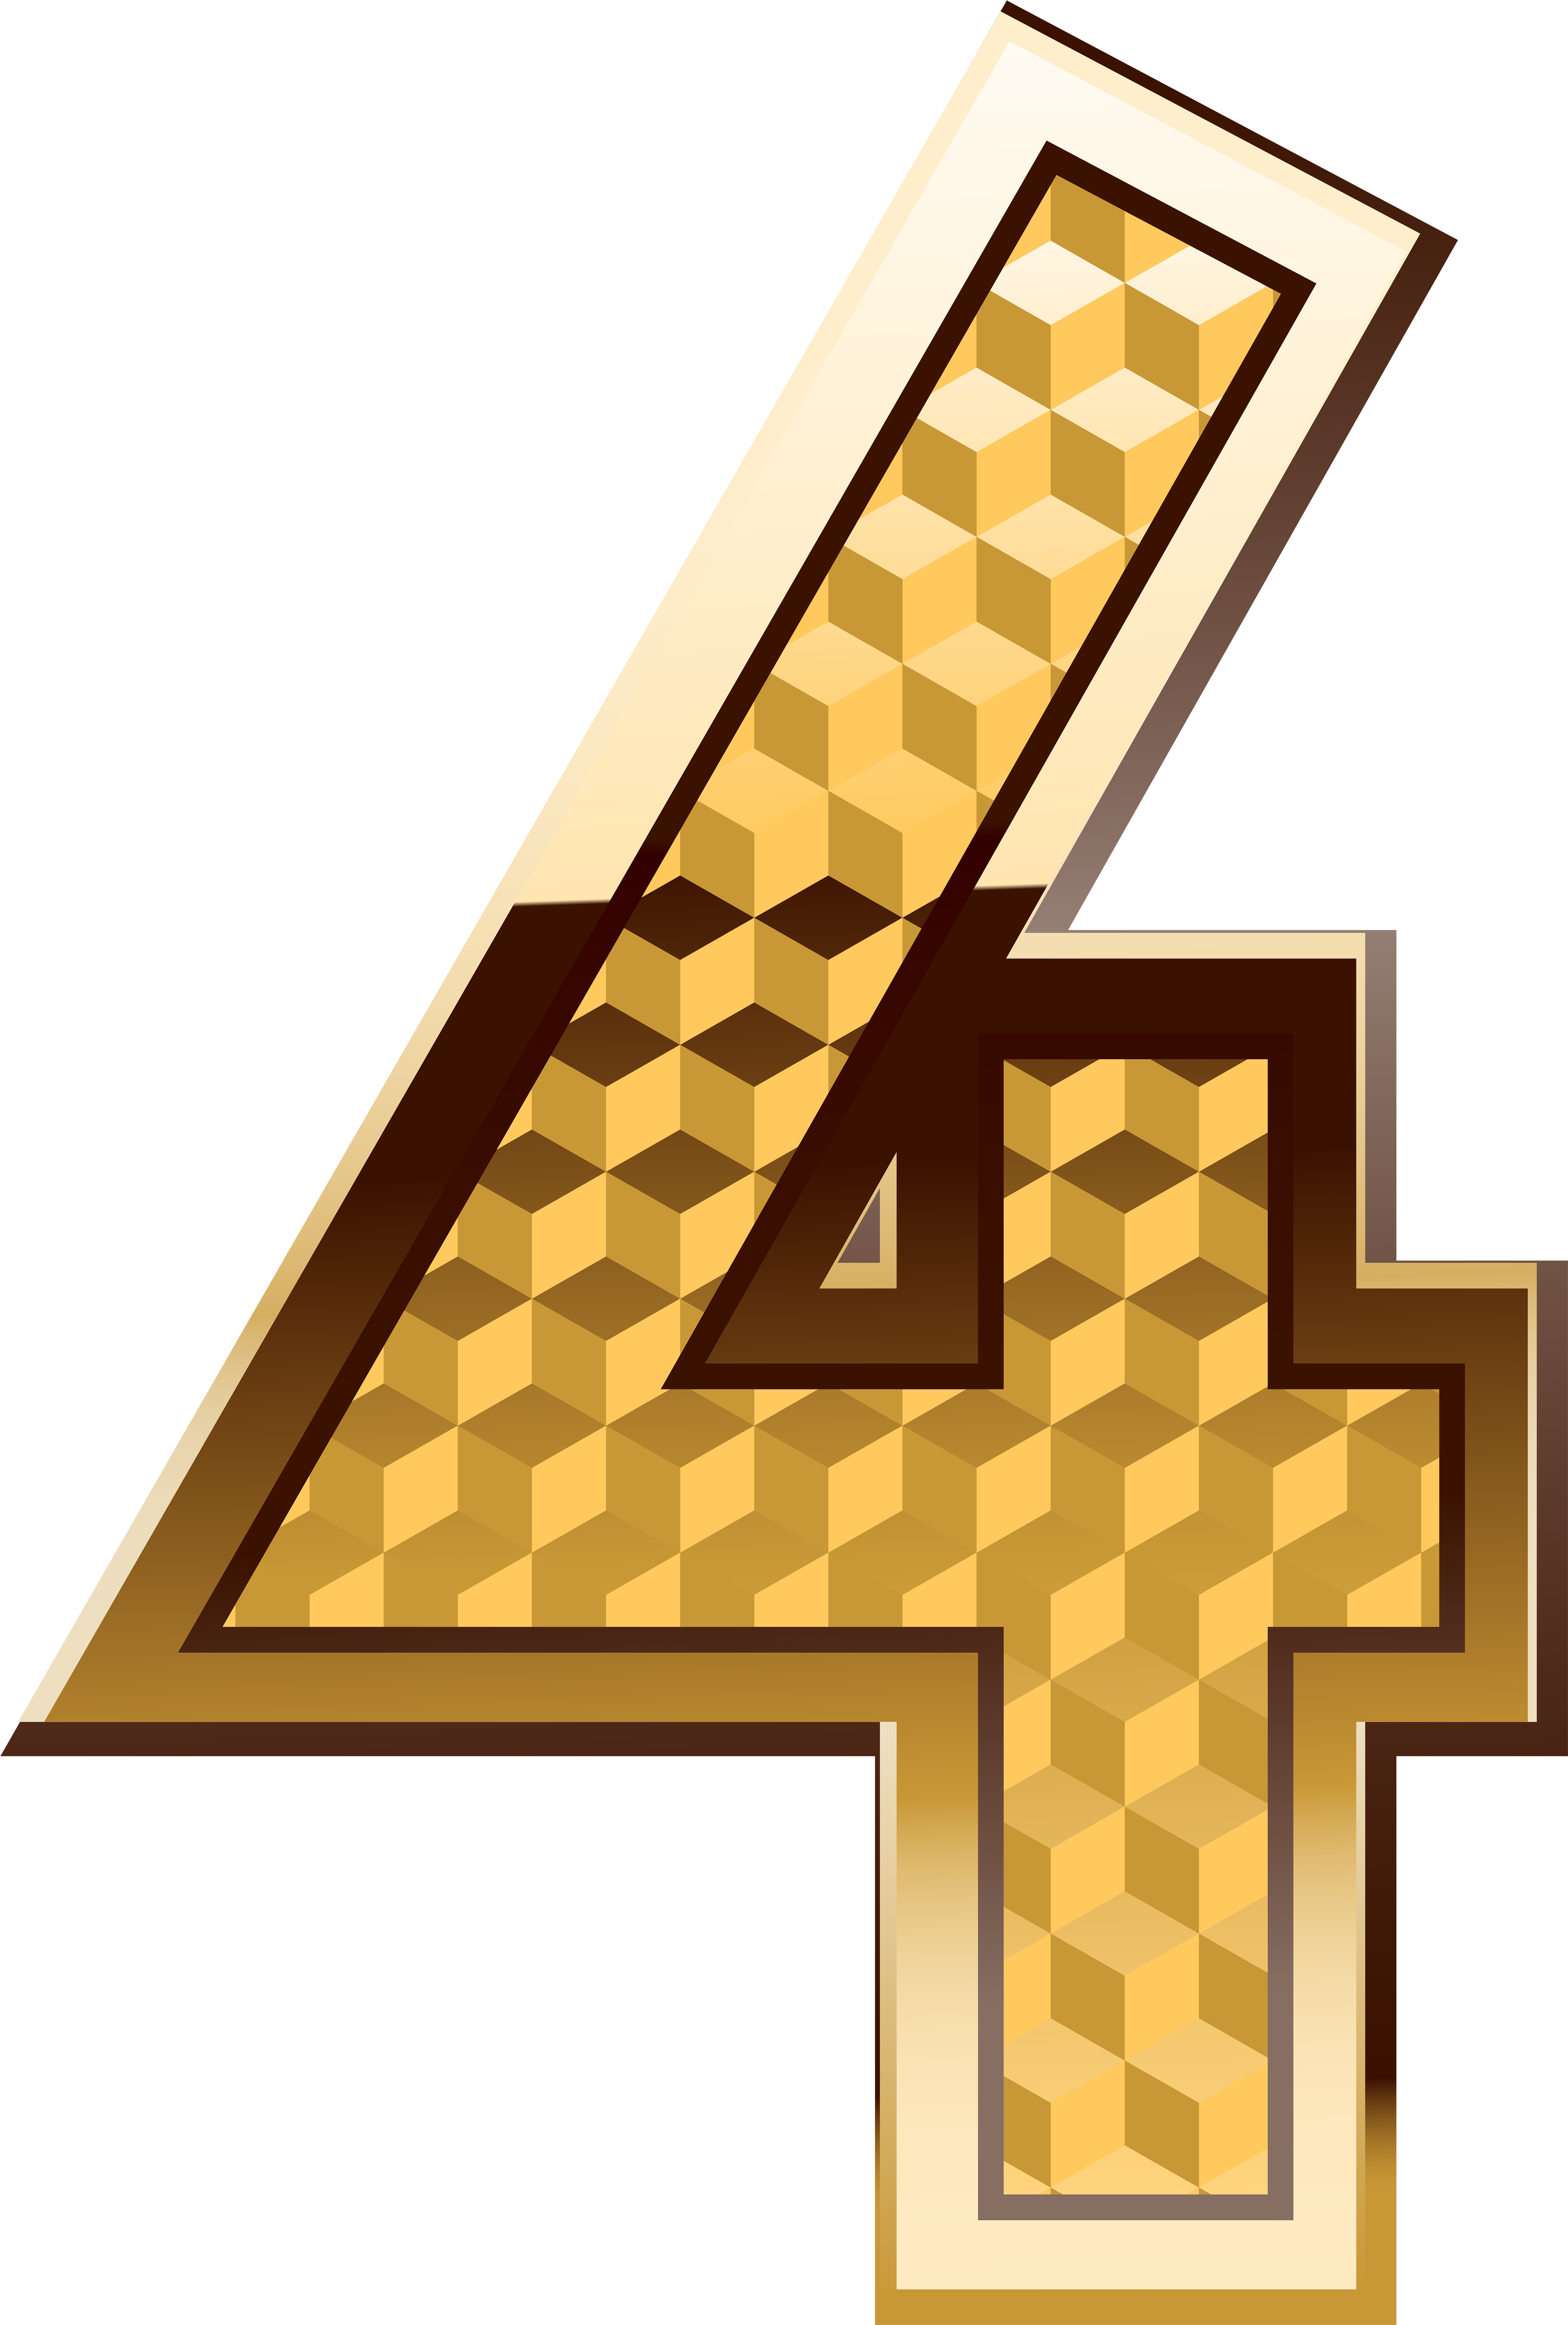 A Number With A Gold And Black Design